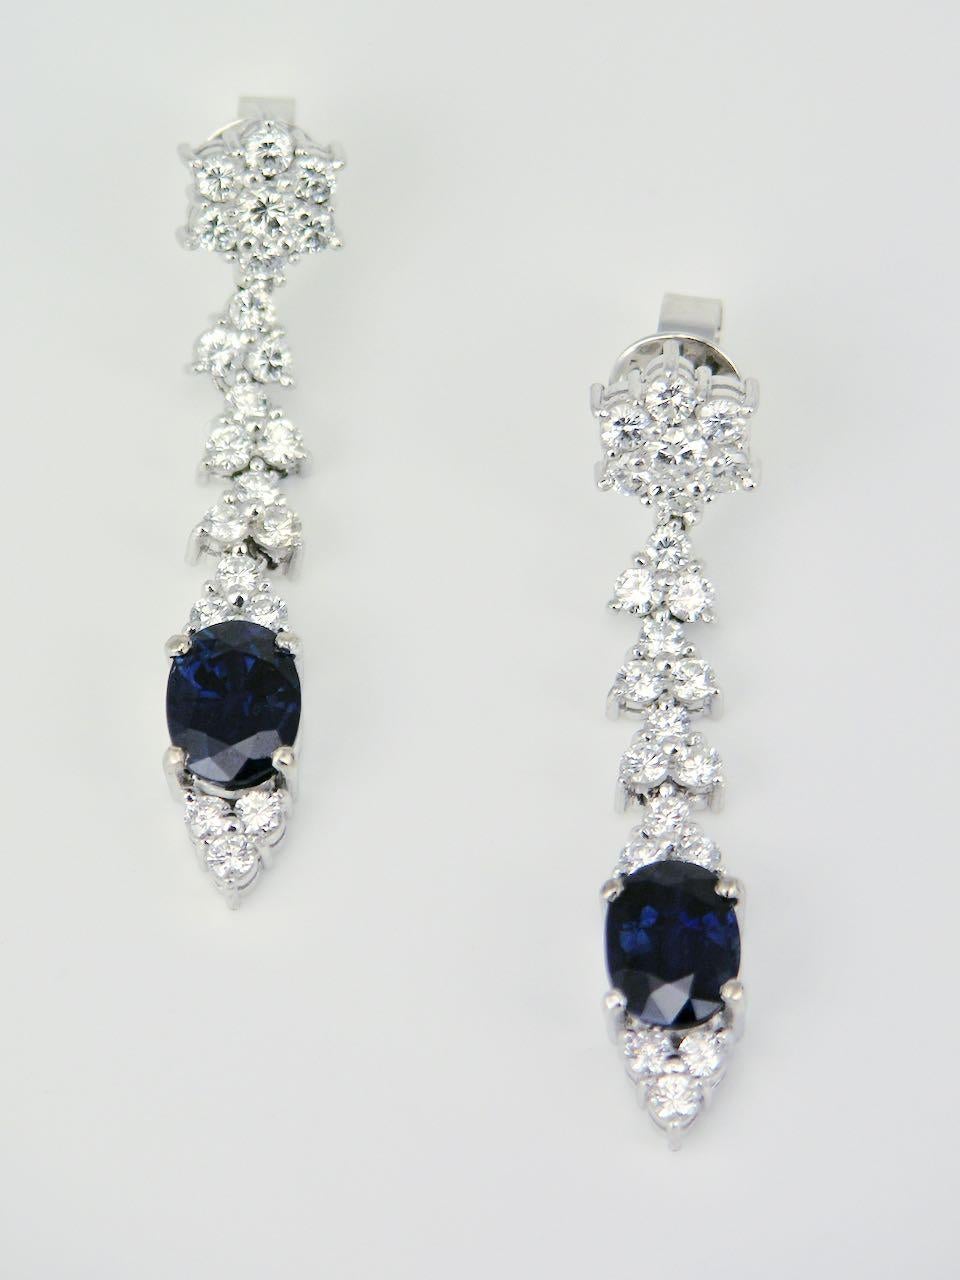 A pair of 18k white gold blue sapphire and diamond drop earrings - each elegant earring consists of an oval dark blue sapphire set in amongst 22 diamonds arranged in leaf shape motifs and suspended below a flower shape cluster with post fittings for